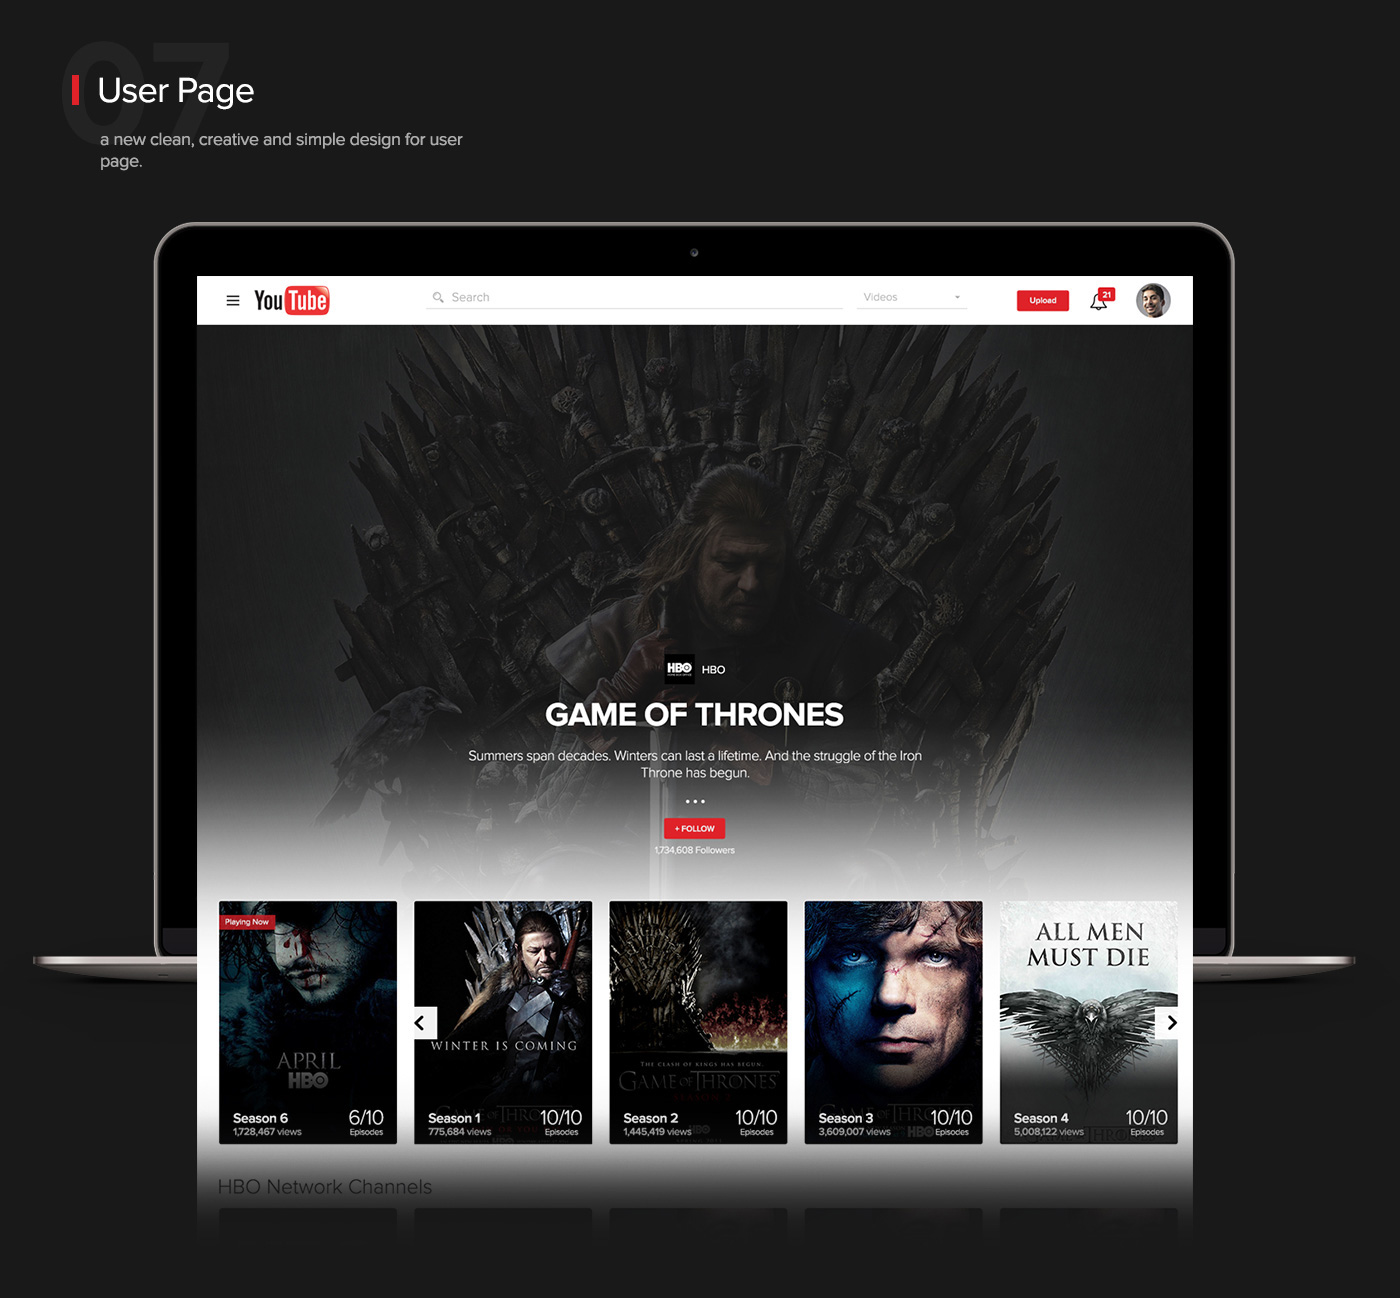 youtube you tube redesign UI ux video movie media Website concept player